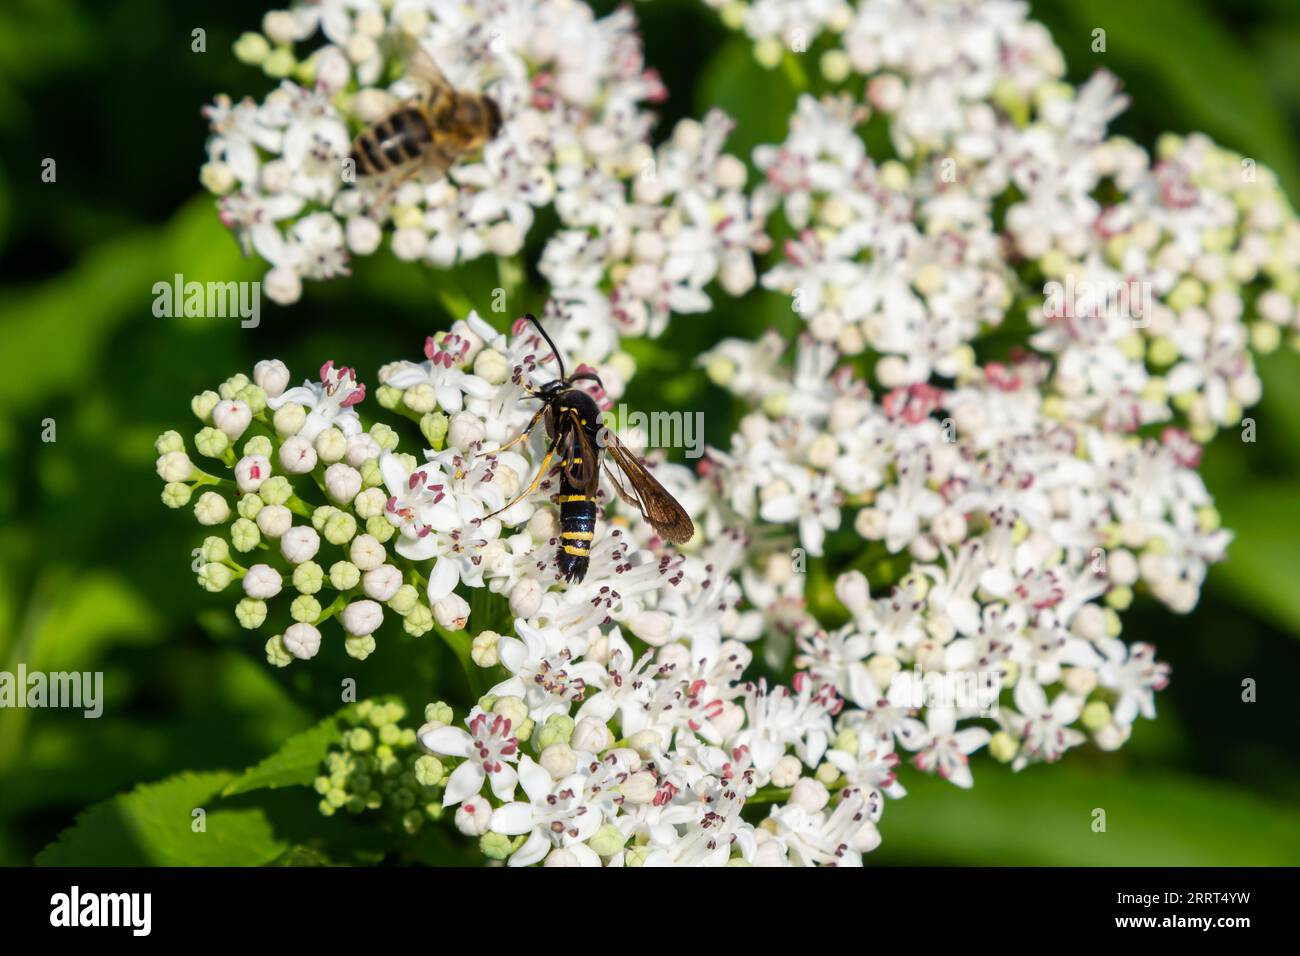 Paranthrene tabaniformis on elder flower close-up. In the natural environment, near the forest in summer. Stock Photo